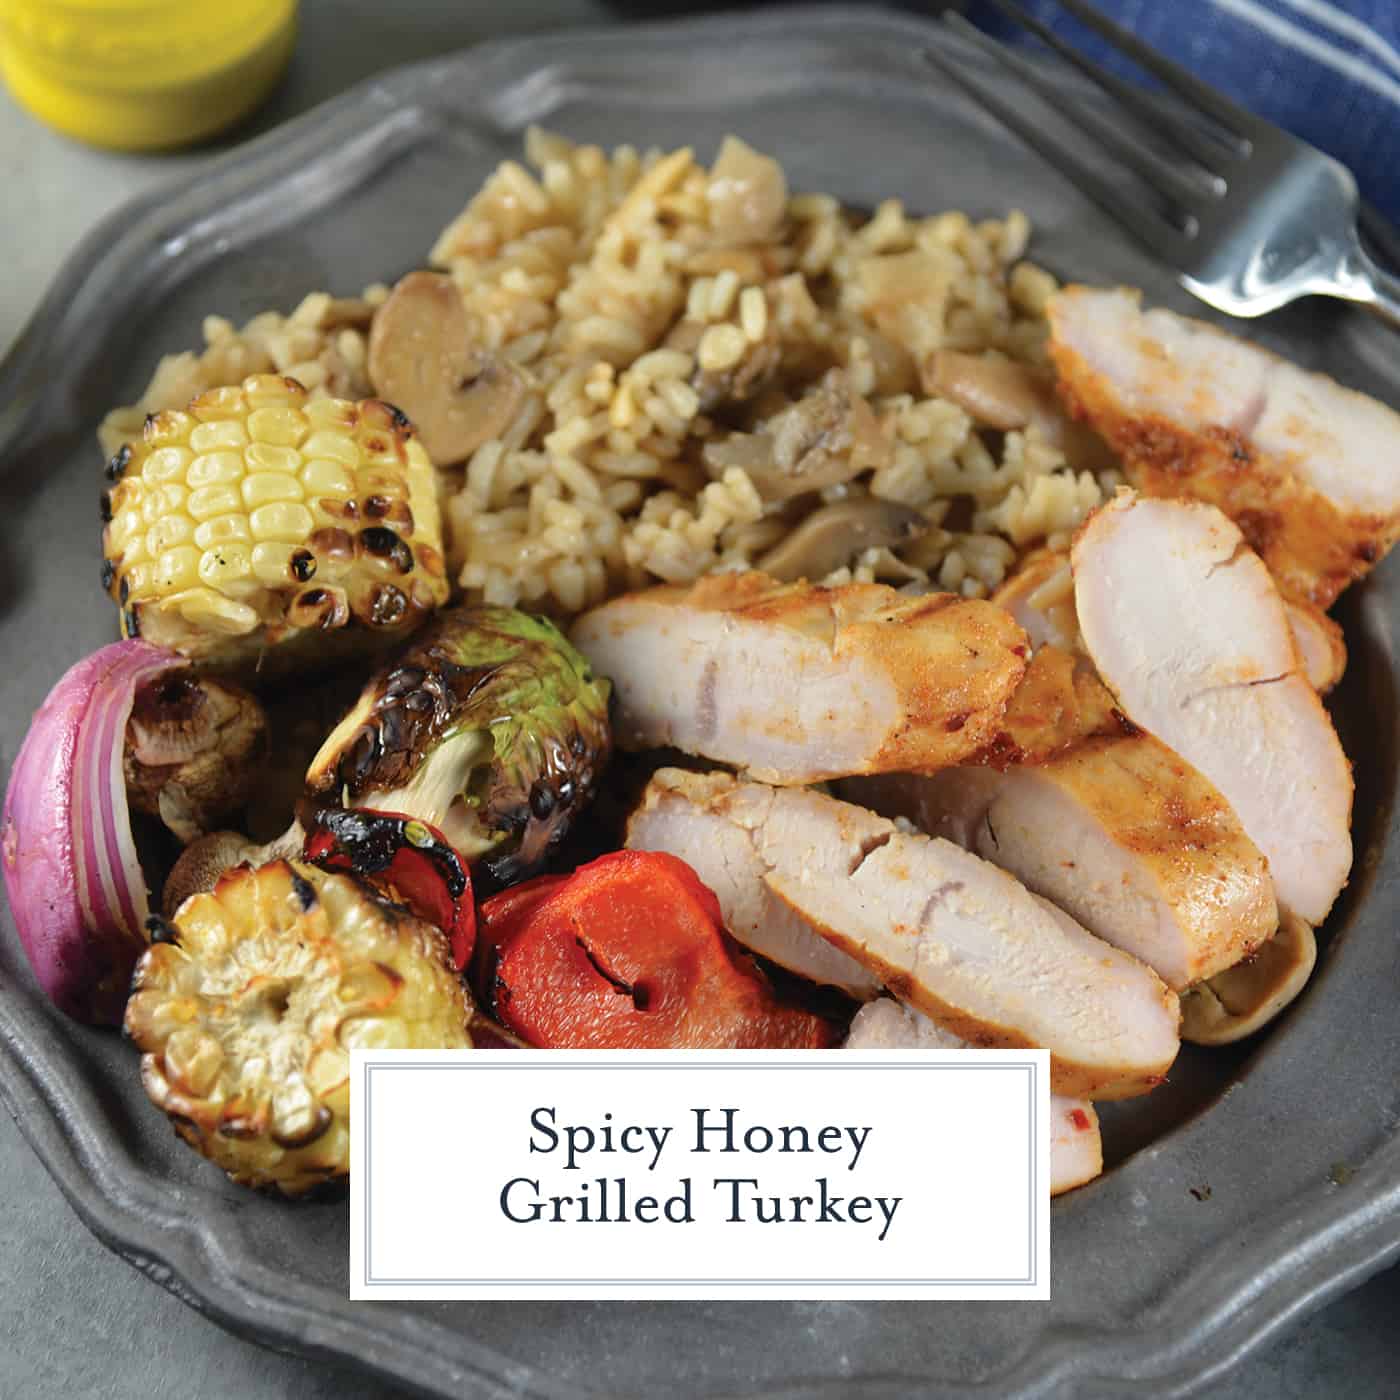 Spicy Honey Grilled Turkey is perfect for throwing on the grill for a quick and easy meal time solution! #grilledturkeyrecipes #turkeybreastrecipes www.savoryexperiments.com 